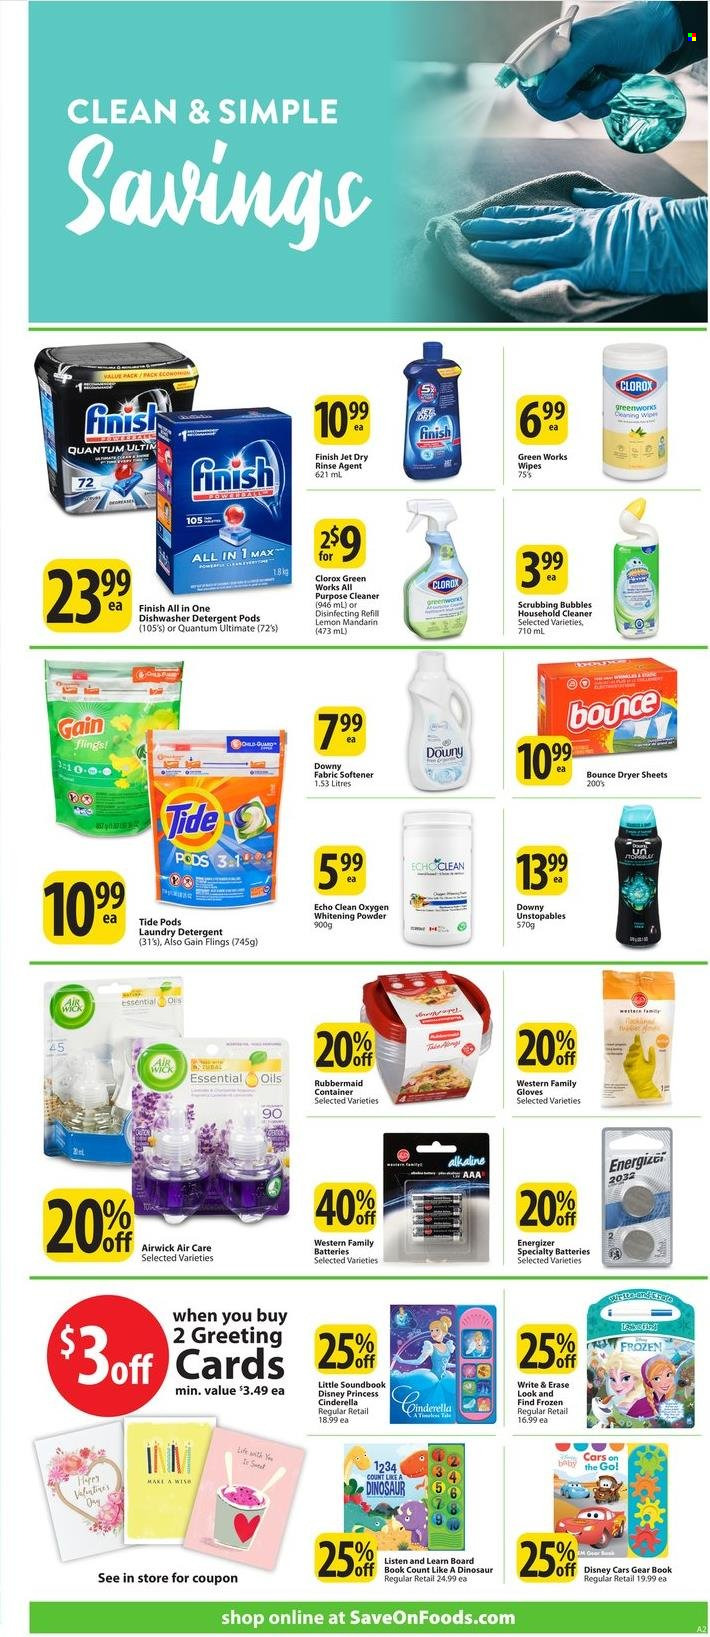 thumbnail - Save-On-Foods Flyer - January 26, 2023 - February 01, 2023 - Sales products - mandarines, Disney, wipes, Gain, Scrubbing Bubbles, cleaner, all purpose cleaner, Clorox, Tide, Unstopables, fabric softener, laundry detergent, whitening powder, Bounce, dryer sheets, Downy Laundry, Jet, container, Go!, gloves, detergent, Energizer. Page 16.